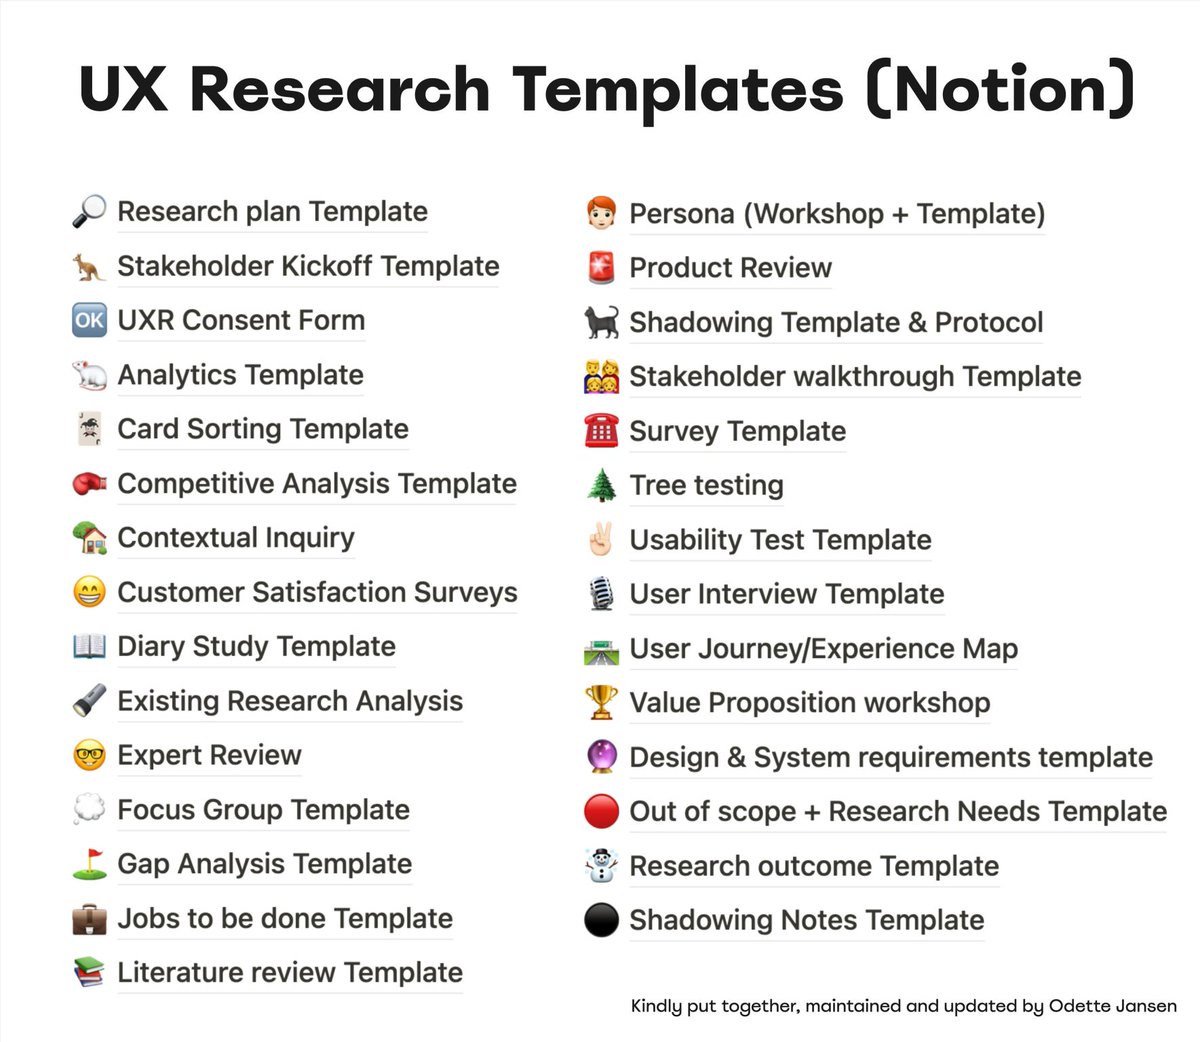 🔎 UX Research Templates (Notion, updated) (notion.so/UX-Research-Te…), a helpful Notion hub with UX research templates for card sorting, gap analysis, jobs to be done, shadowing, stakeholder walkthrough, tree testing and usability testing. By @_Odett.